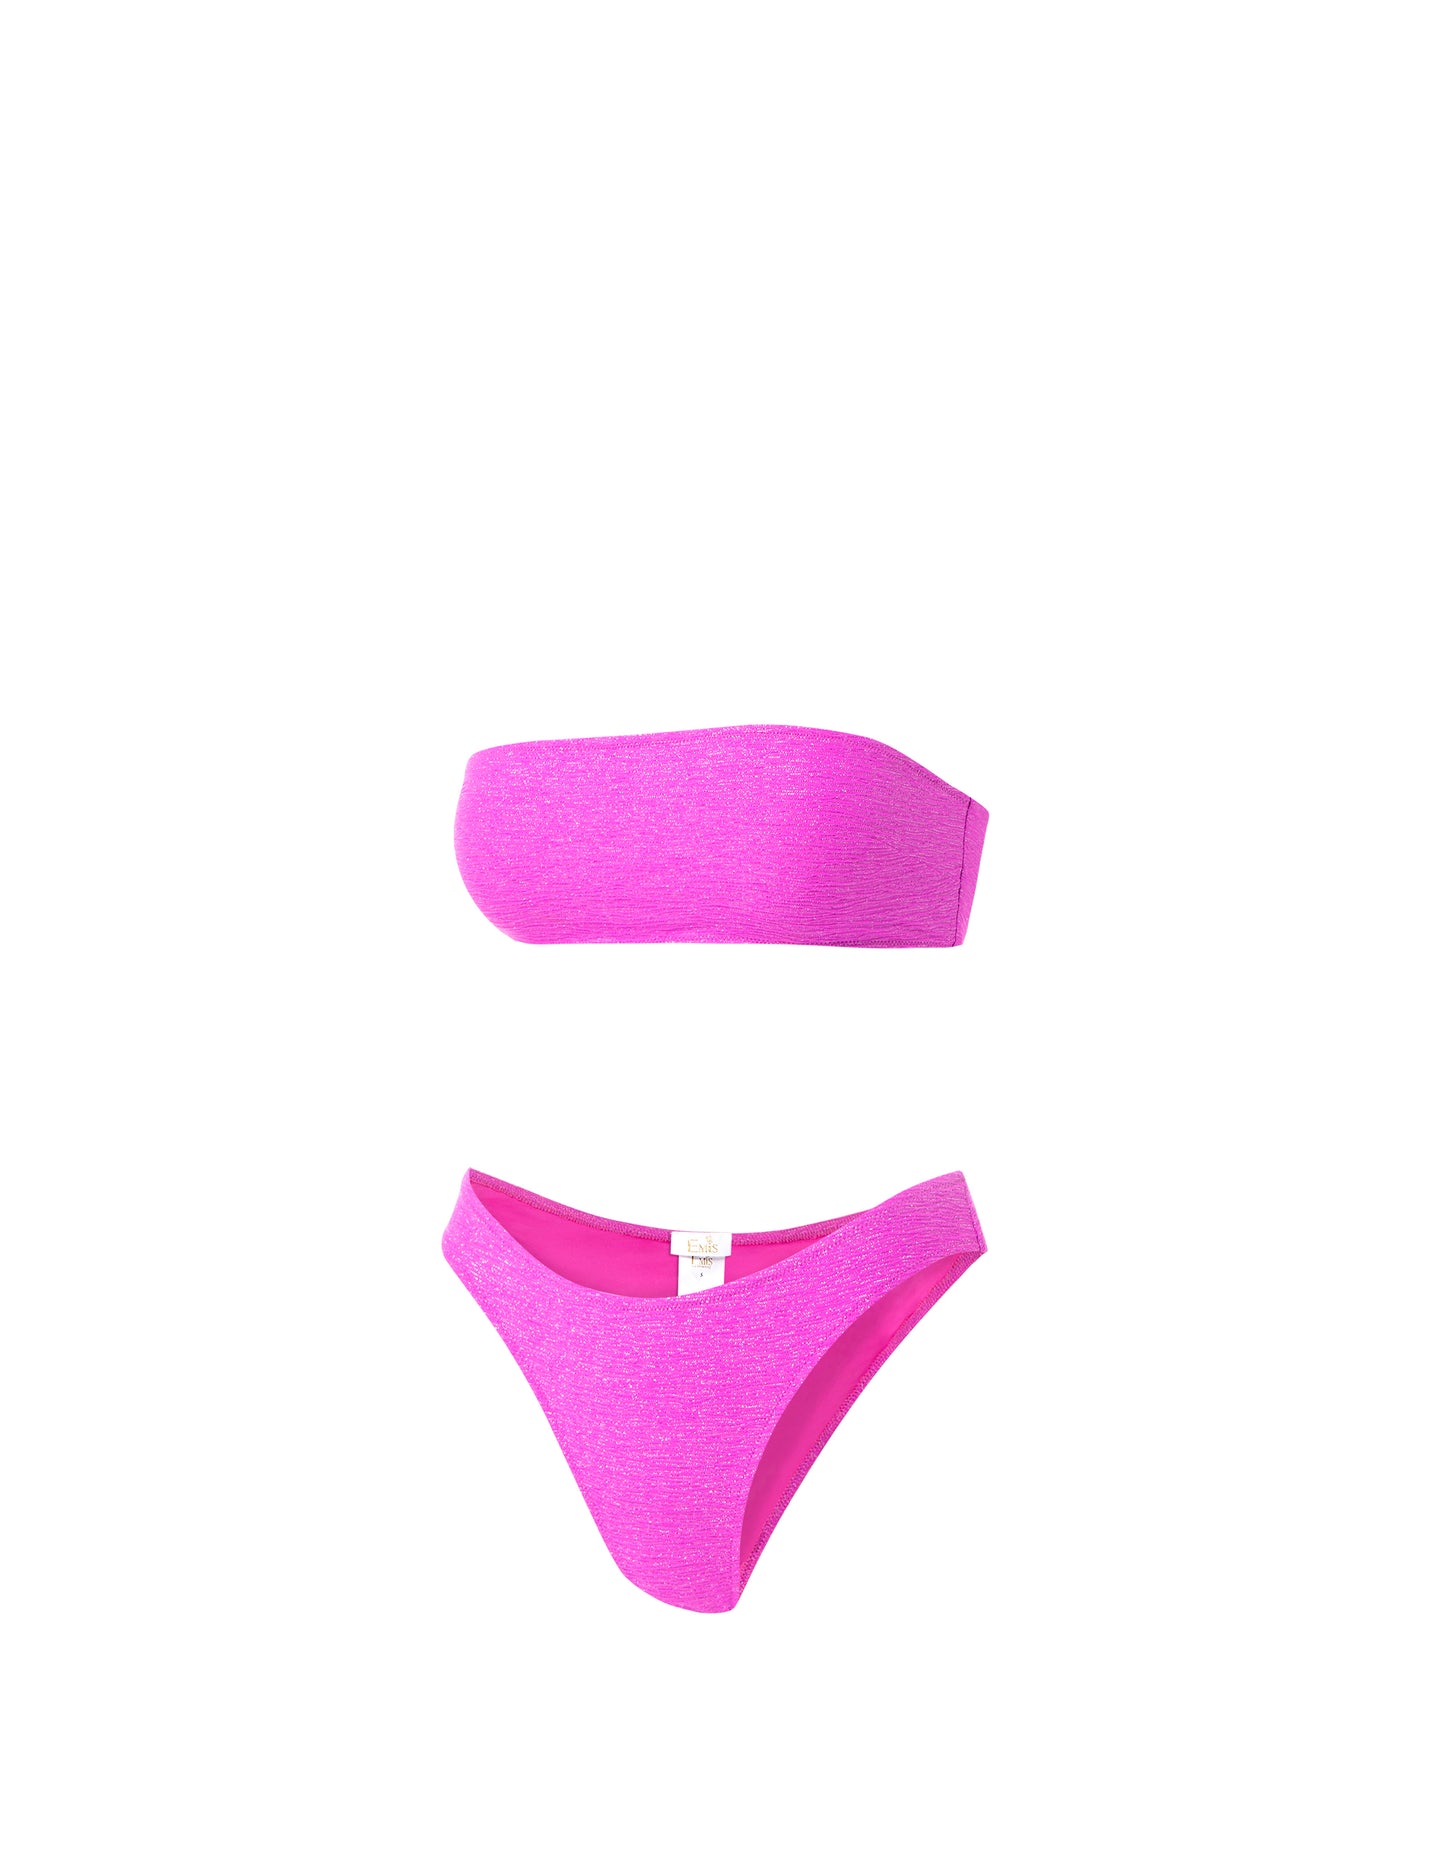 Swimsuit Pearl Hot Pink Bottom